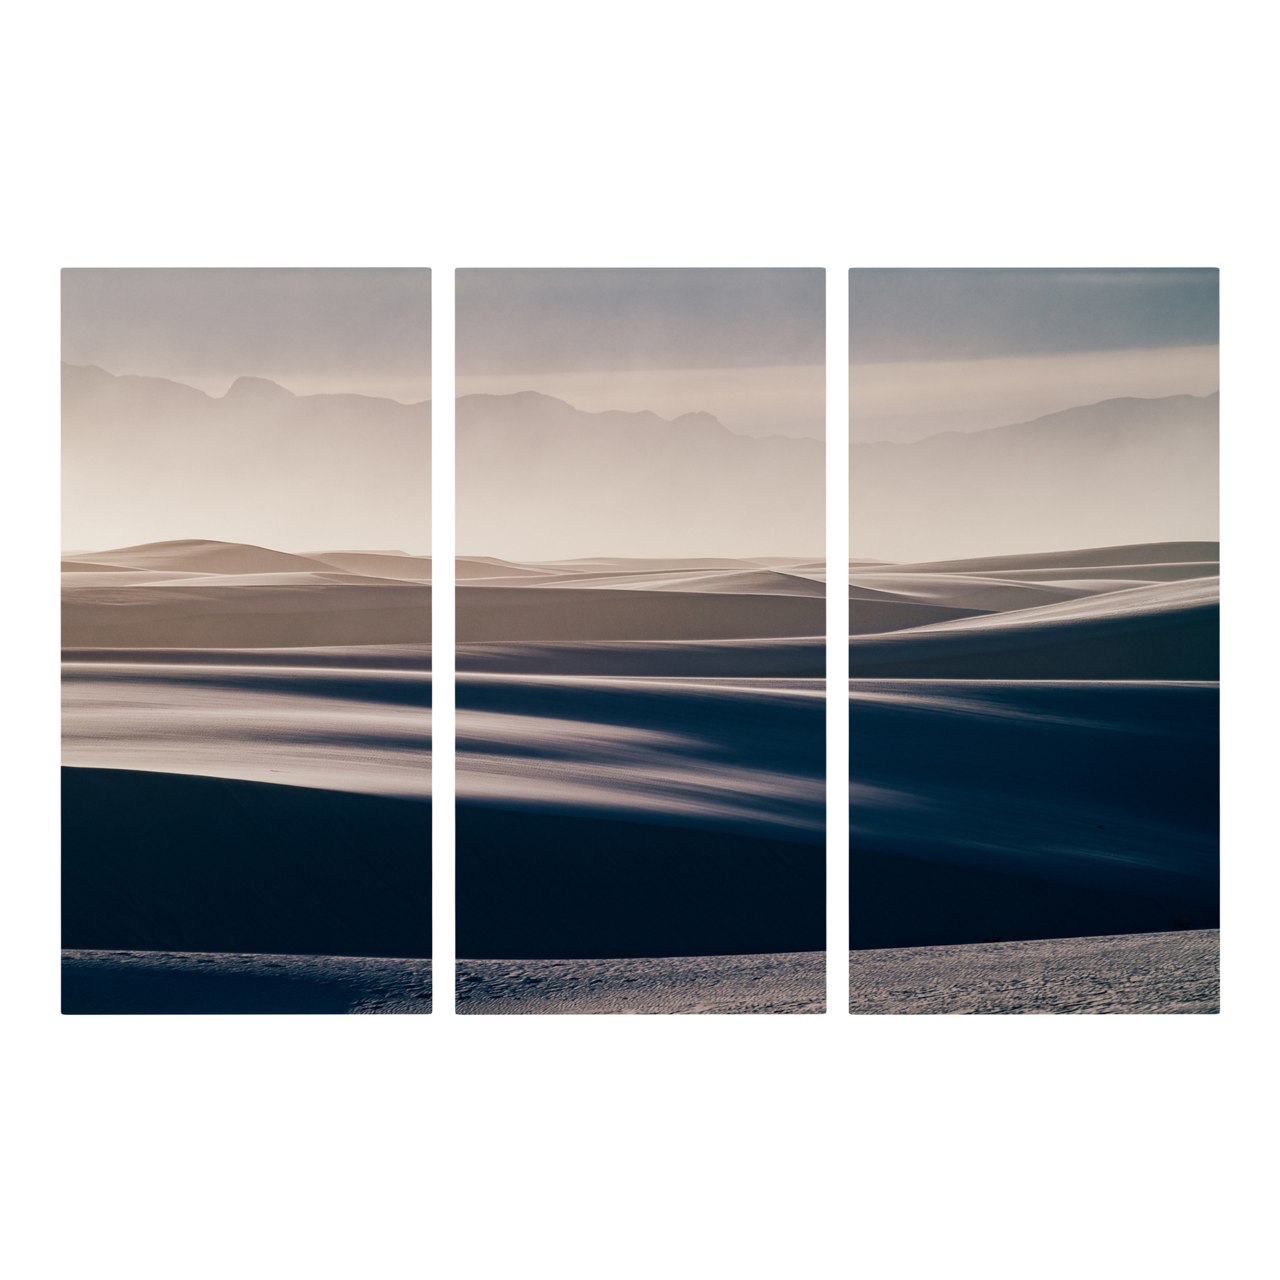 "Any Way the Wind Blows" Triptych | Desert Wall Art Set